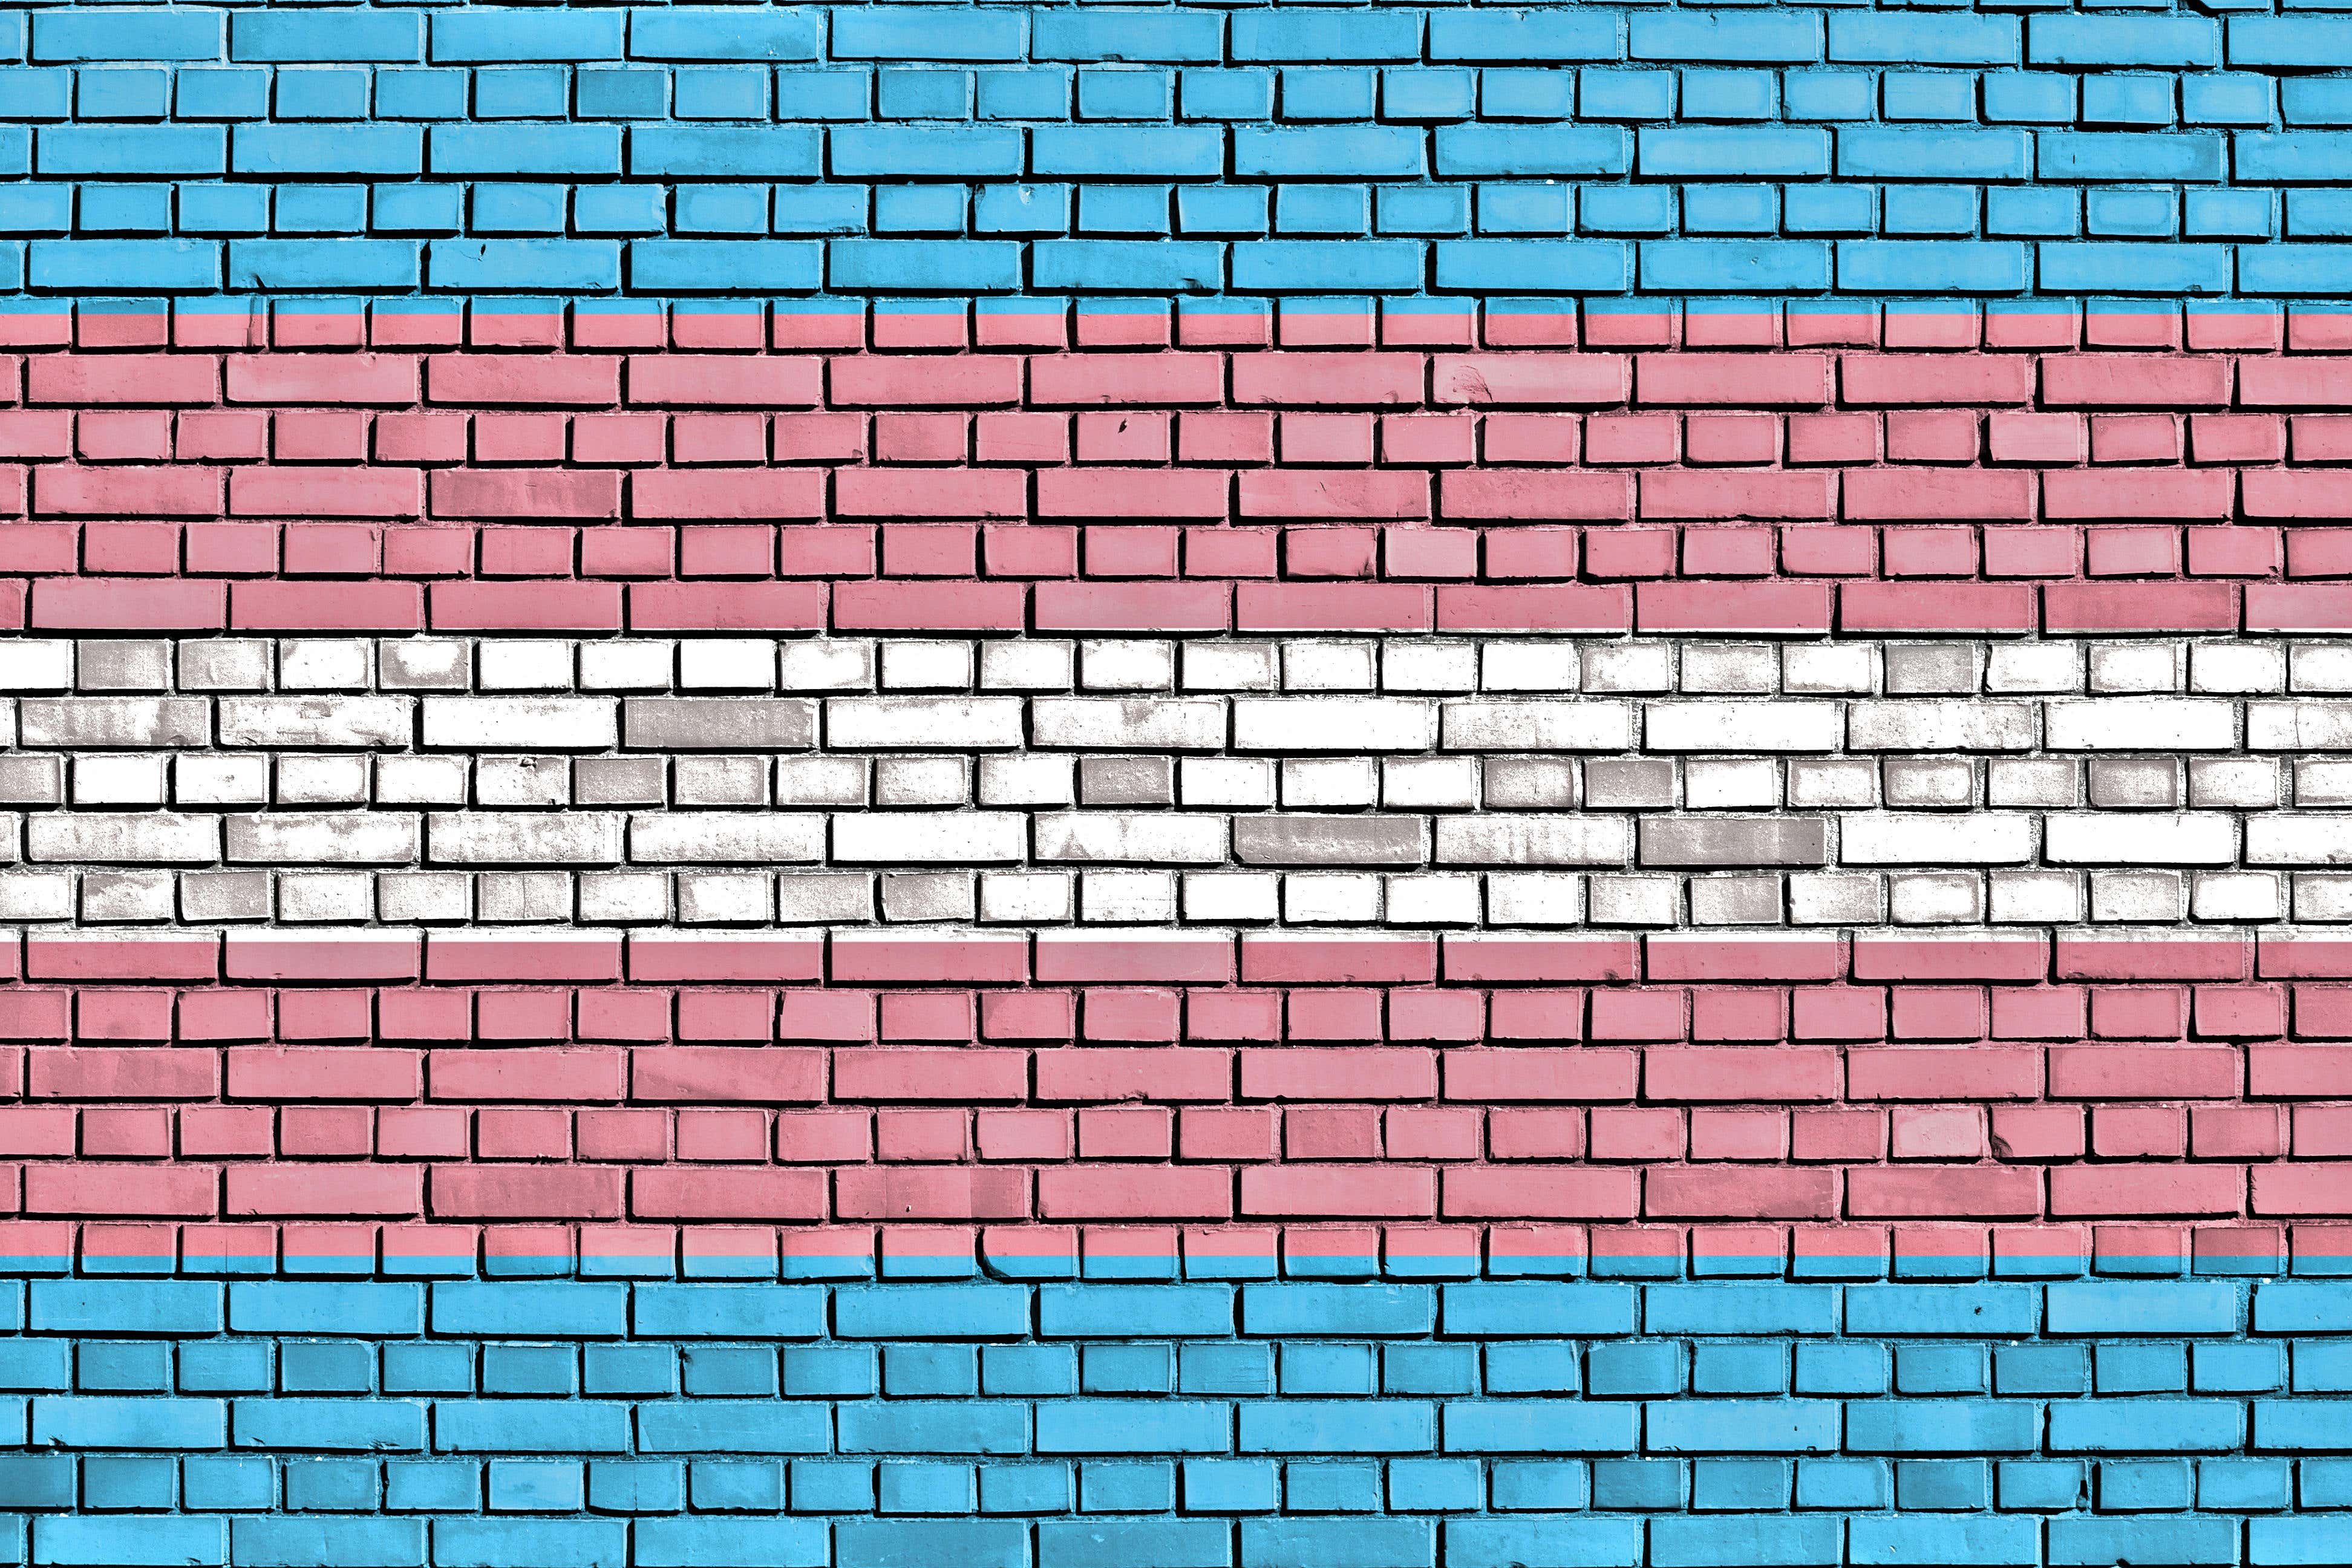 Discussion of transgender issues by politicians, the media and on social media over the last year may have led to an increase in offences, according to the Home Office (Alamy/PA)